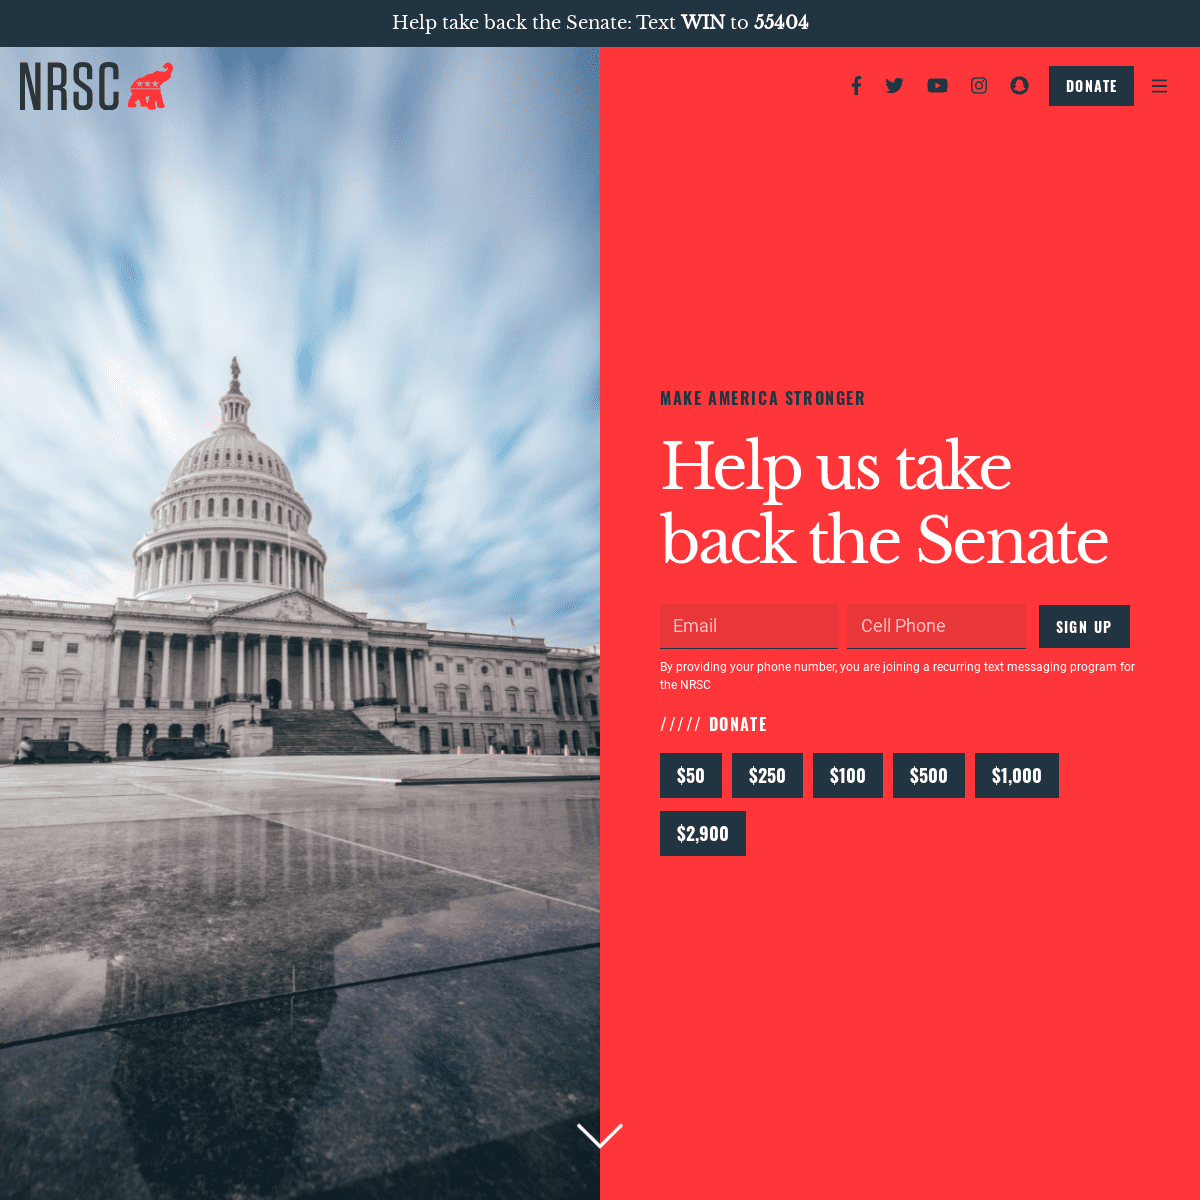 A complete backup of https://nrsc.org